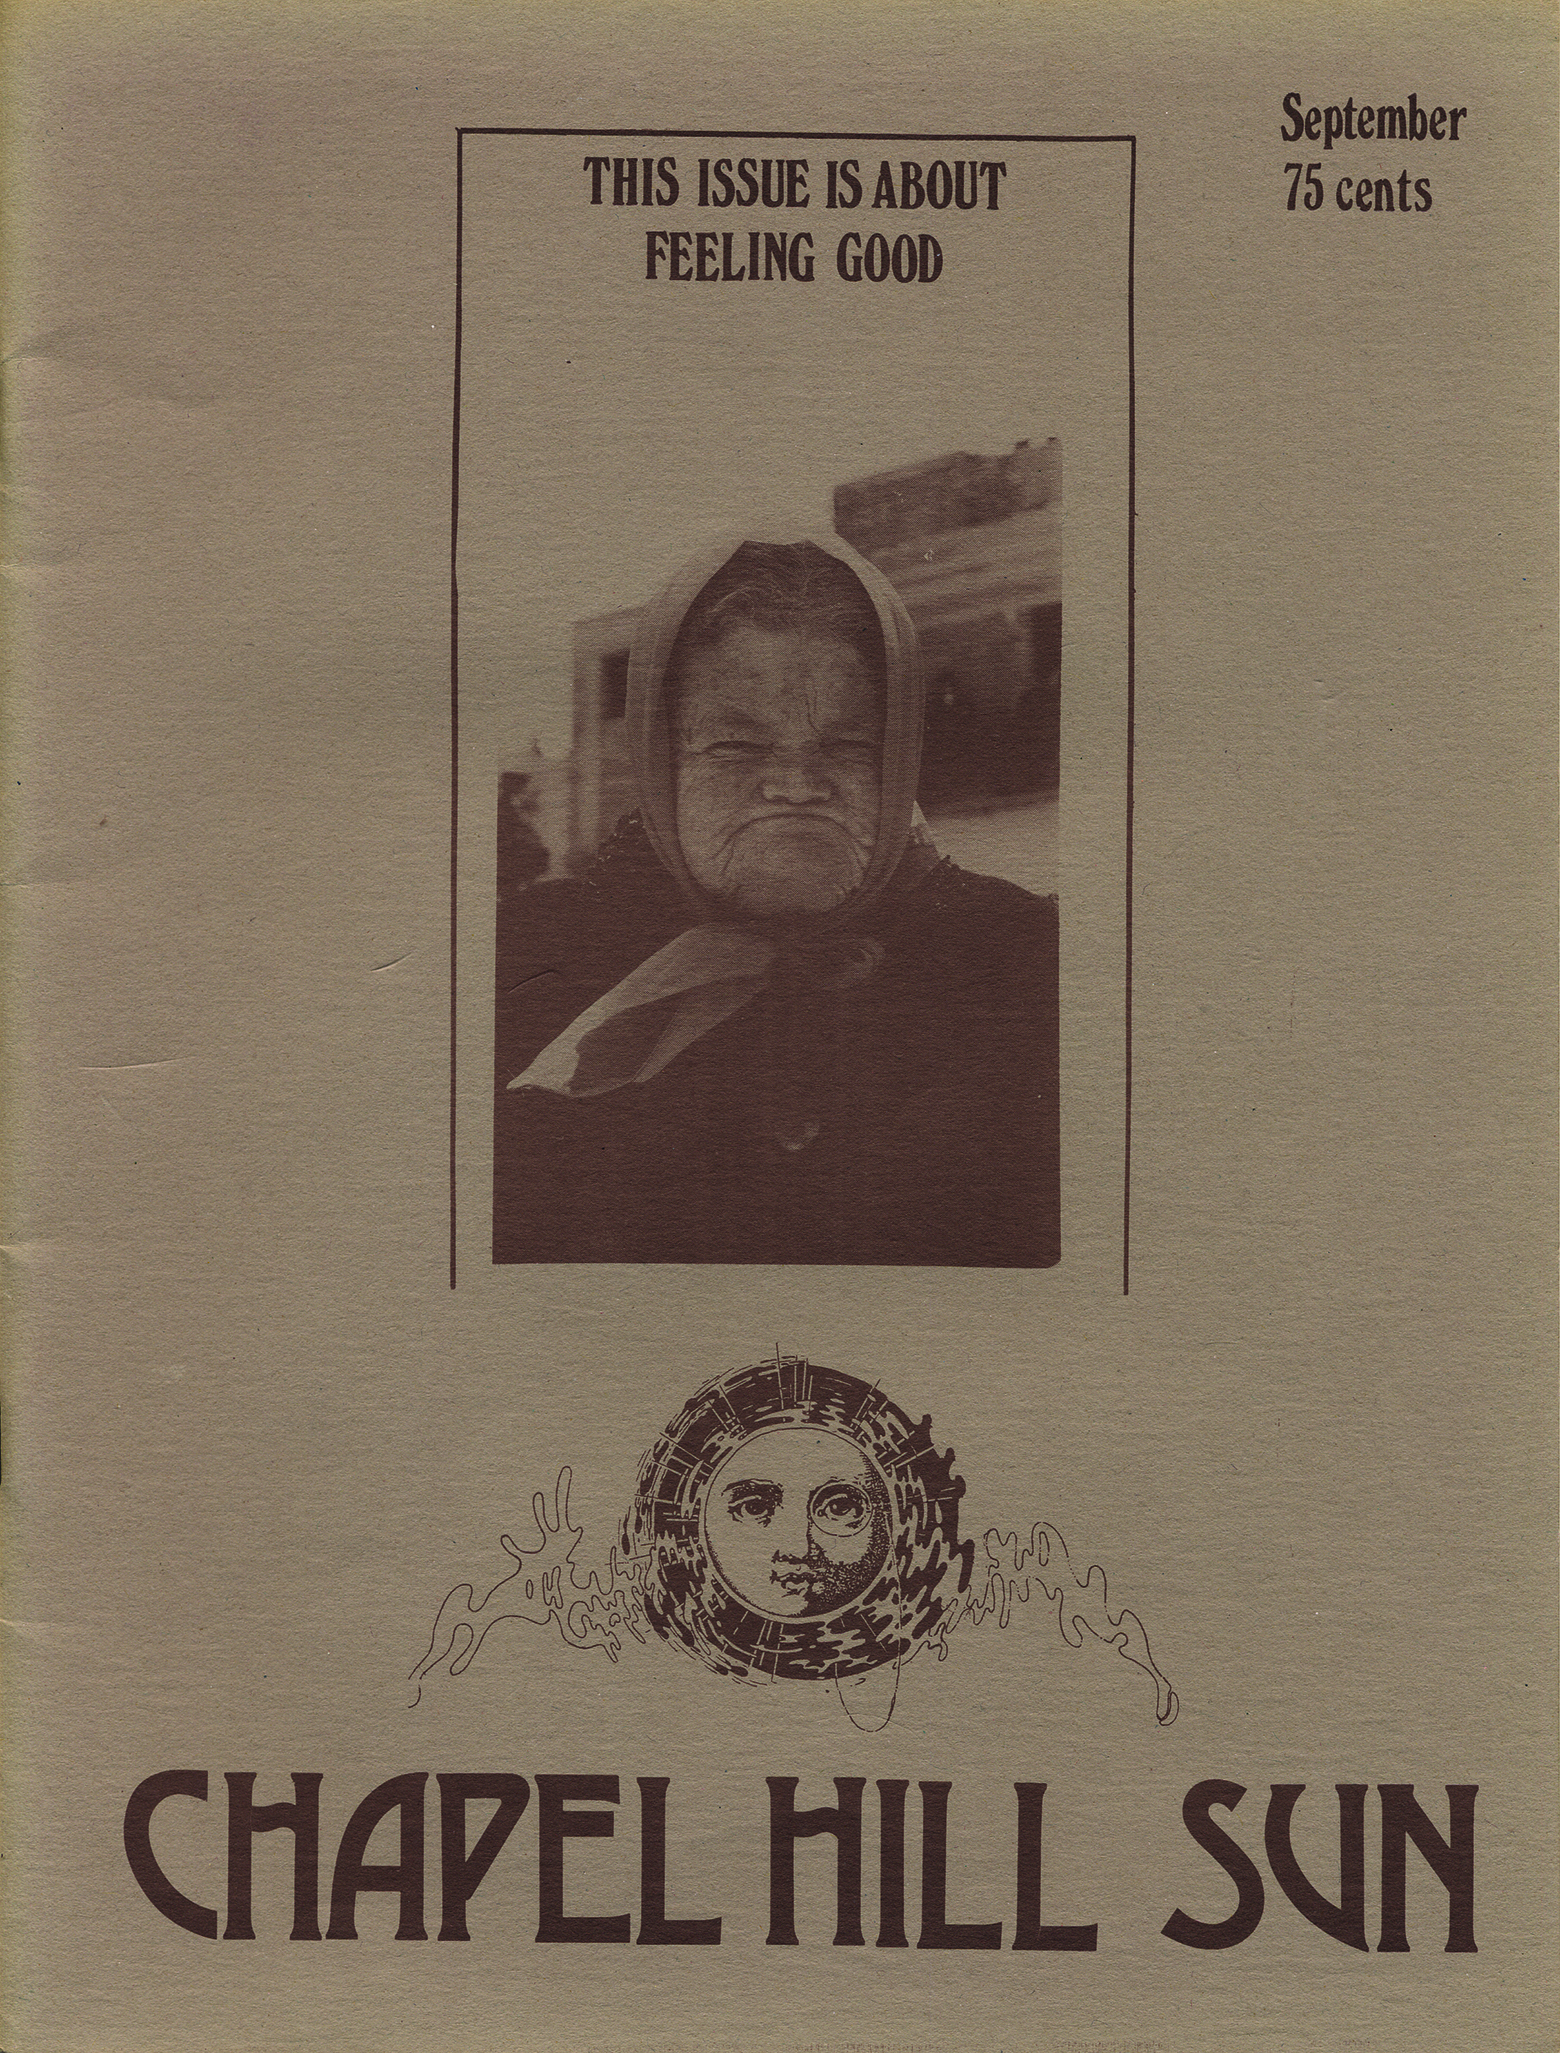 September 1975 cover of The Sun. The scowling face of an old woman in a headscarf is underneath text that reads “This issue is about feeling good.” This cover is the first appearance of the sun-with-a-monocle logo on the front cover.